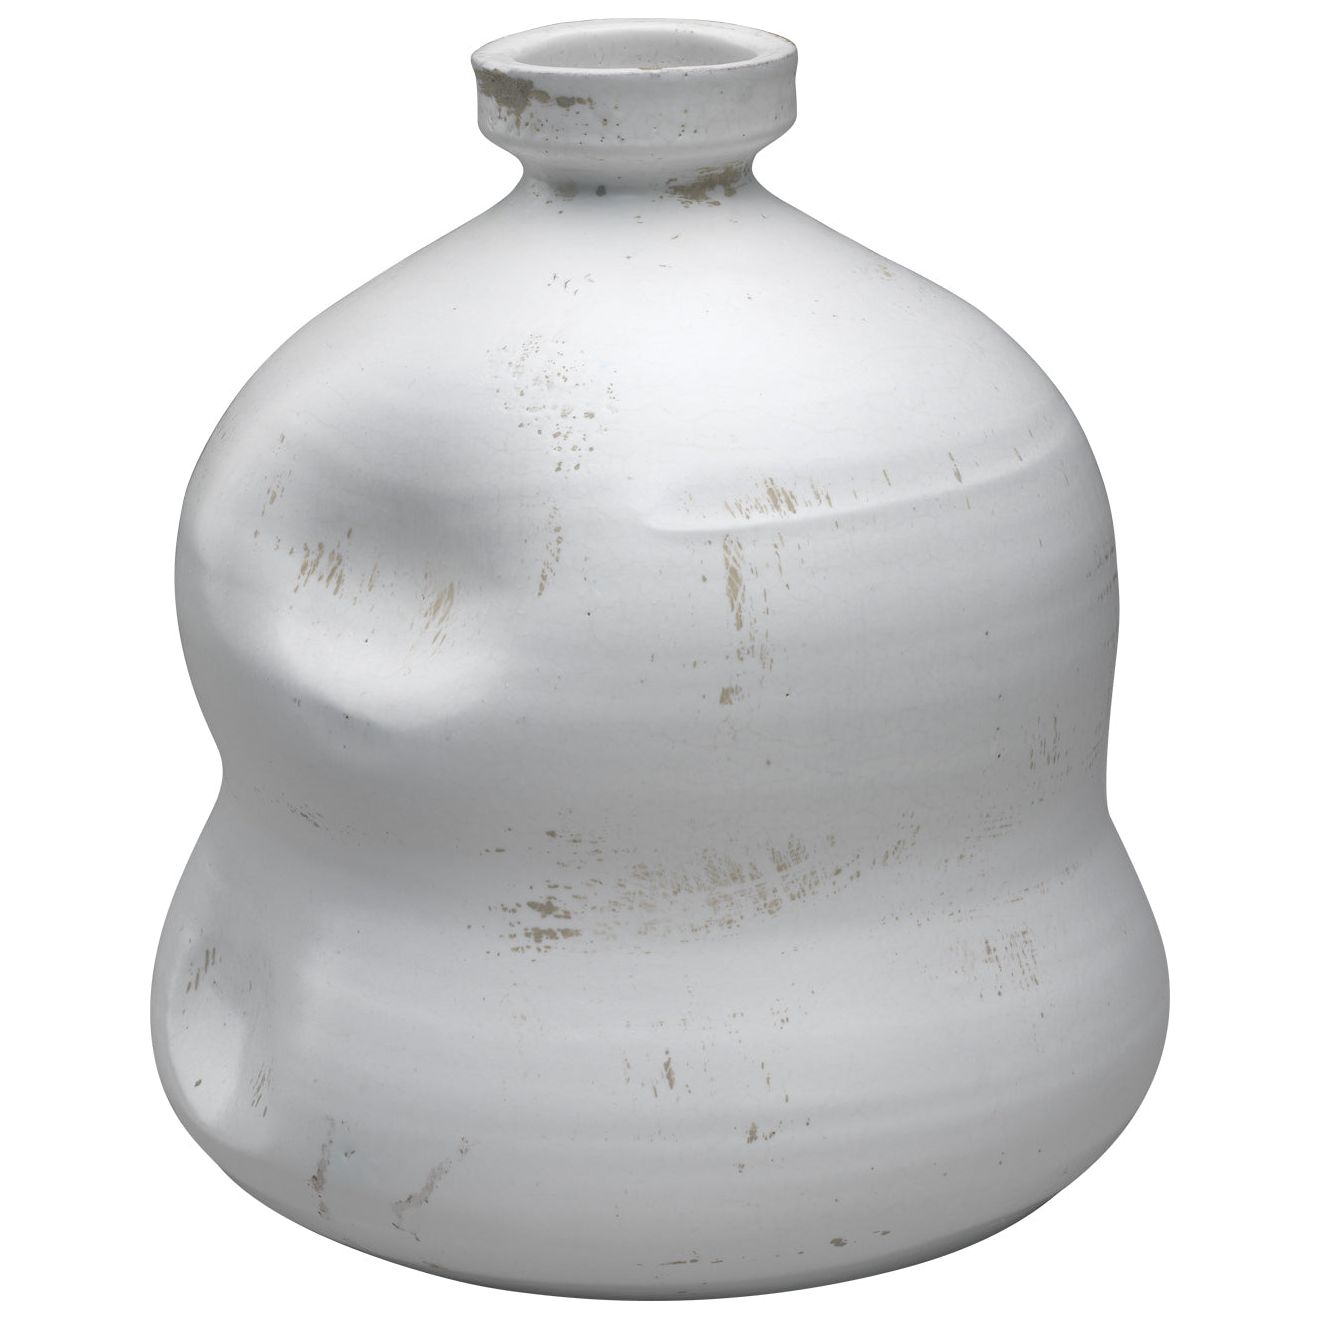 Jamie Young Company - 7DIMP-JUWH - Dimple Jug - Dimple - White